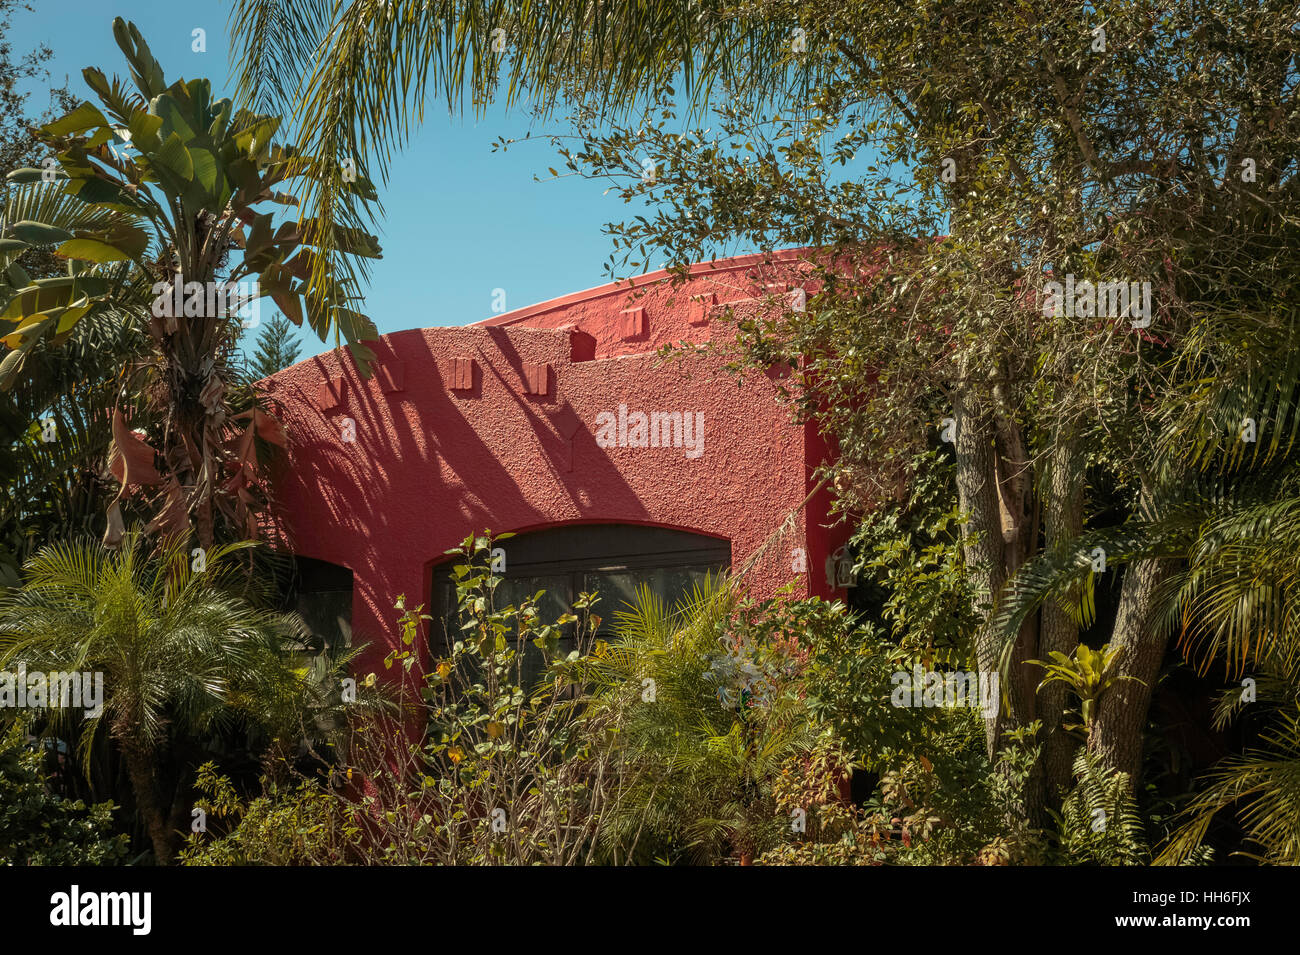 Residence nearly obstructed from view by thick tropical foliage Stock Photo